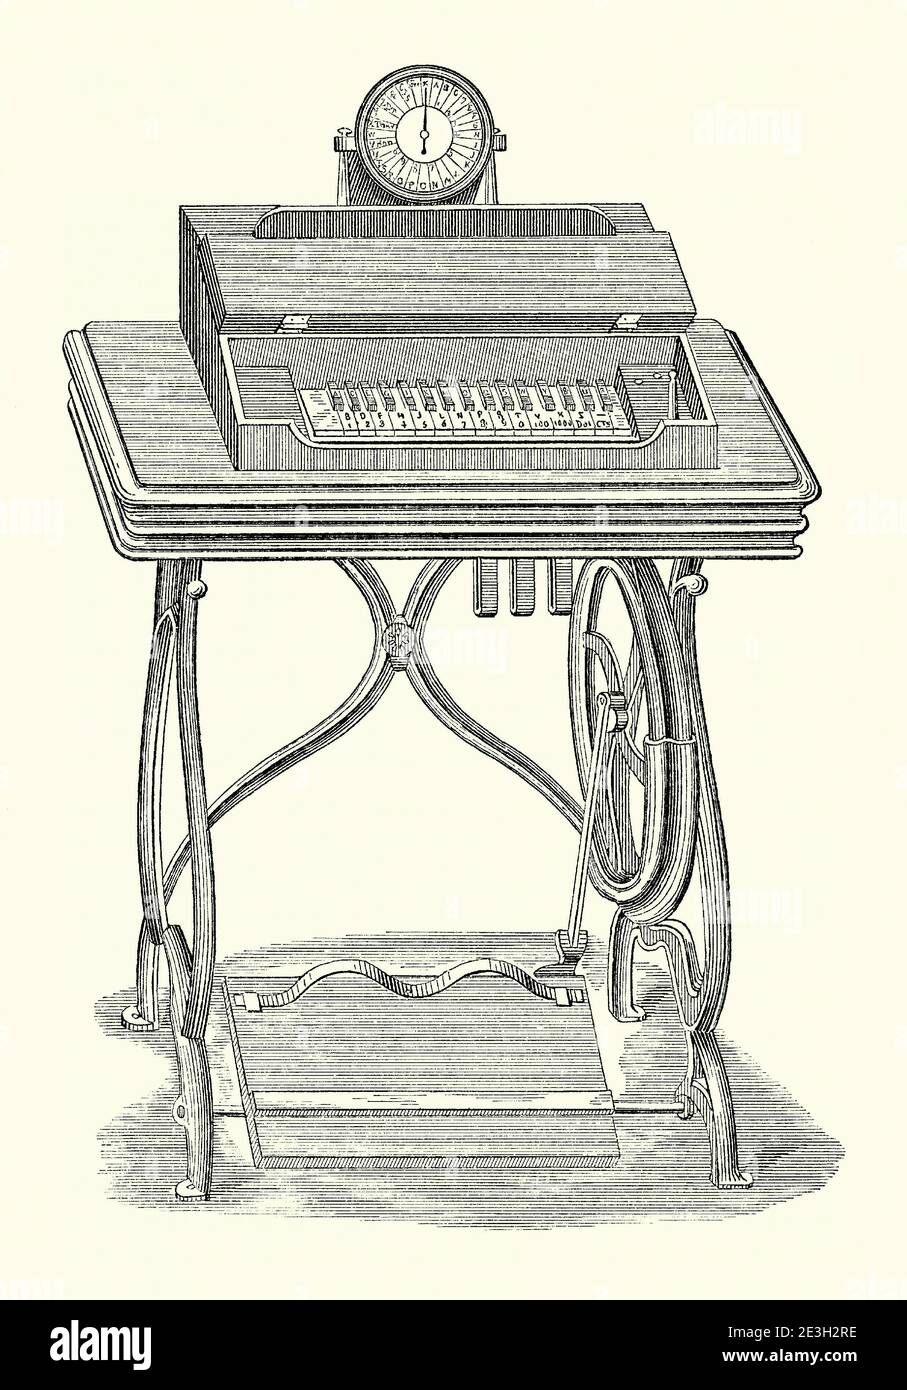 An old engraving of a printing telegraph stand designed by George L Anders. It is from a mechanical engineering book of the 1880s. The stand has a keyboard and visible dial or typewheel. The typewheel at the sending end was synchronised to a similar wheel at the receiving end. When the character key was pressed at the home station, it actuated the typewheel at the distant station just as the same character moved into the printing position – an example of a synchronous data transmission system. When transmitting power was provided to the electric magneto by the foot treadle. Stock Photo